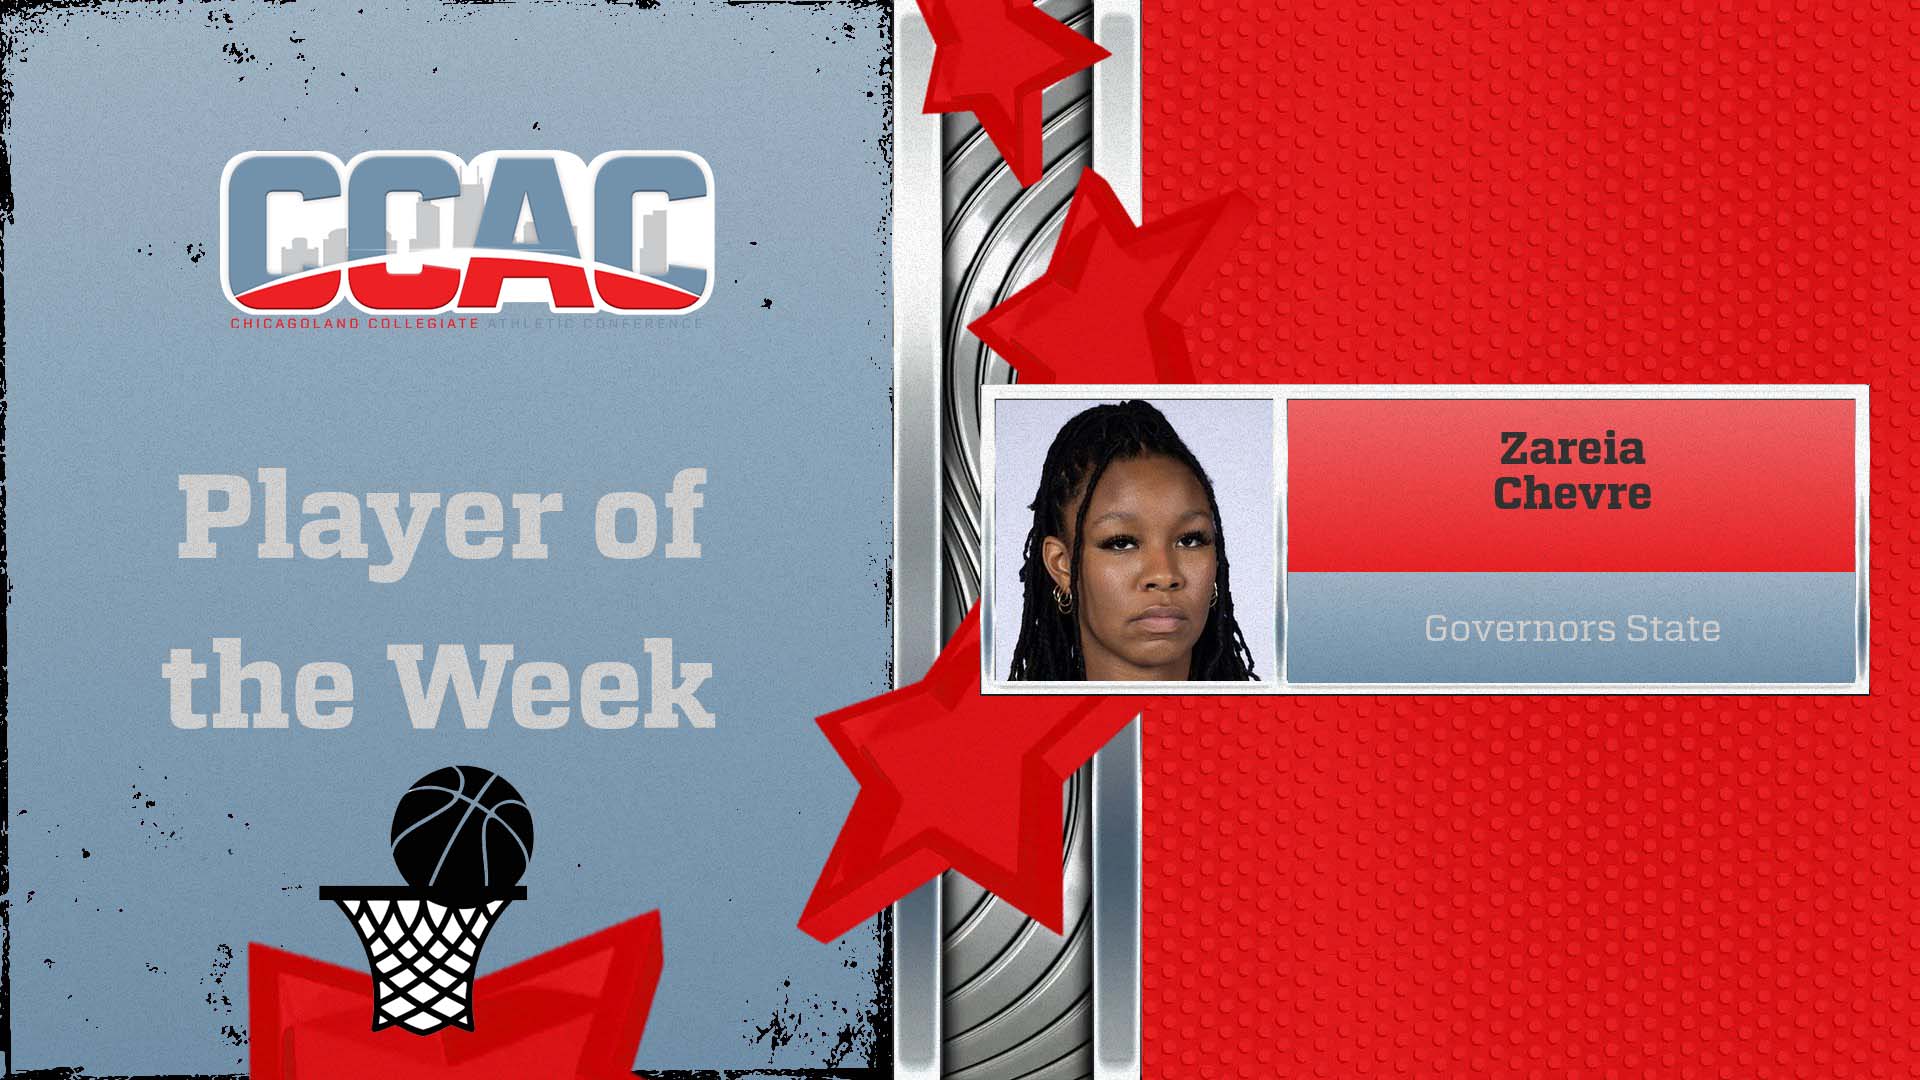 Career-High Night, Double-Double Land Women's Basketball Weekly Honors For GSU's Chevre